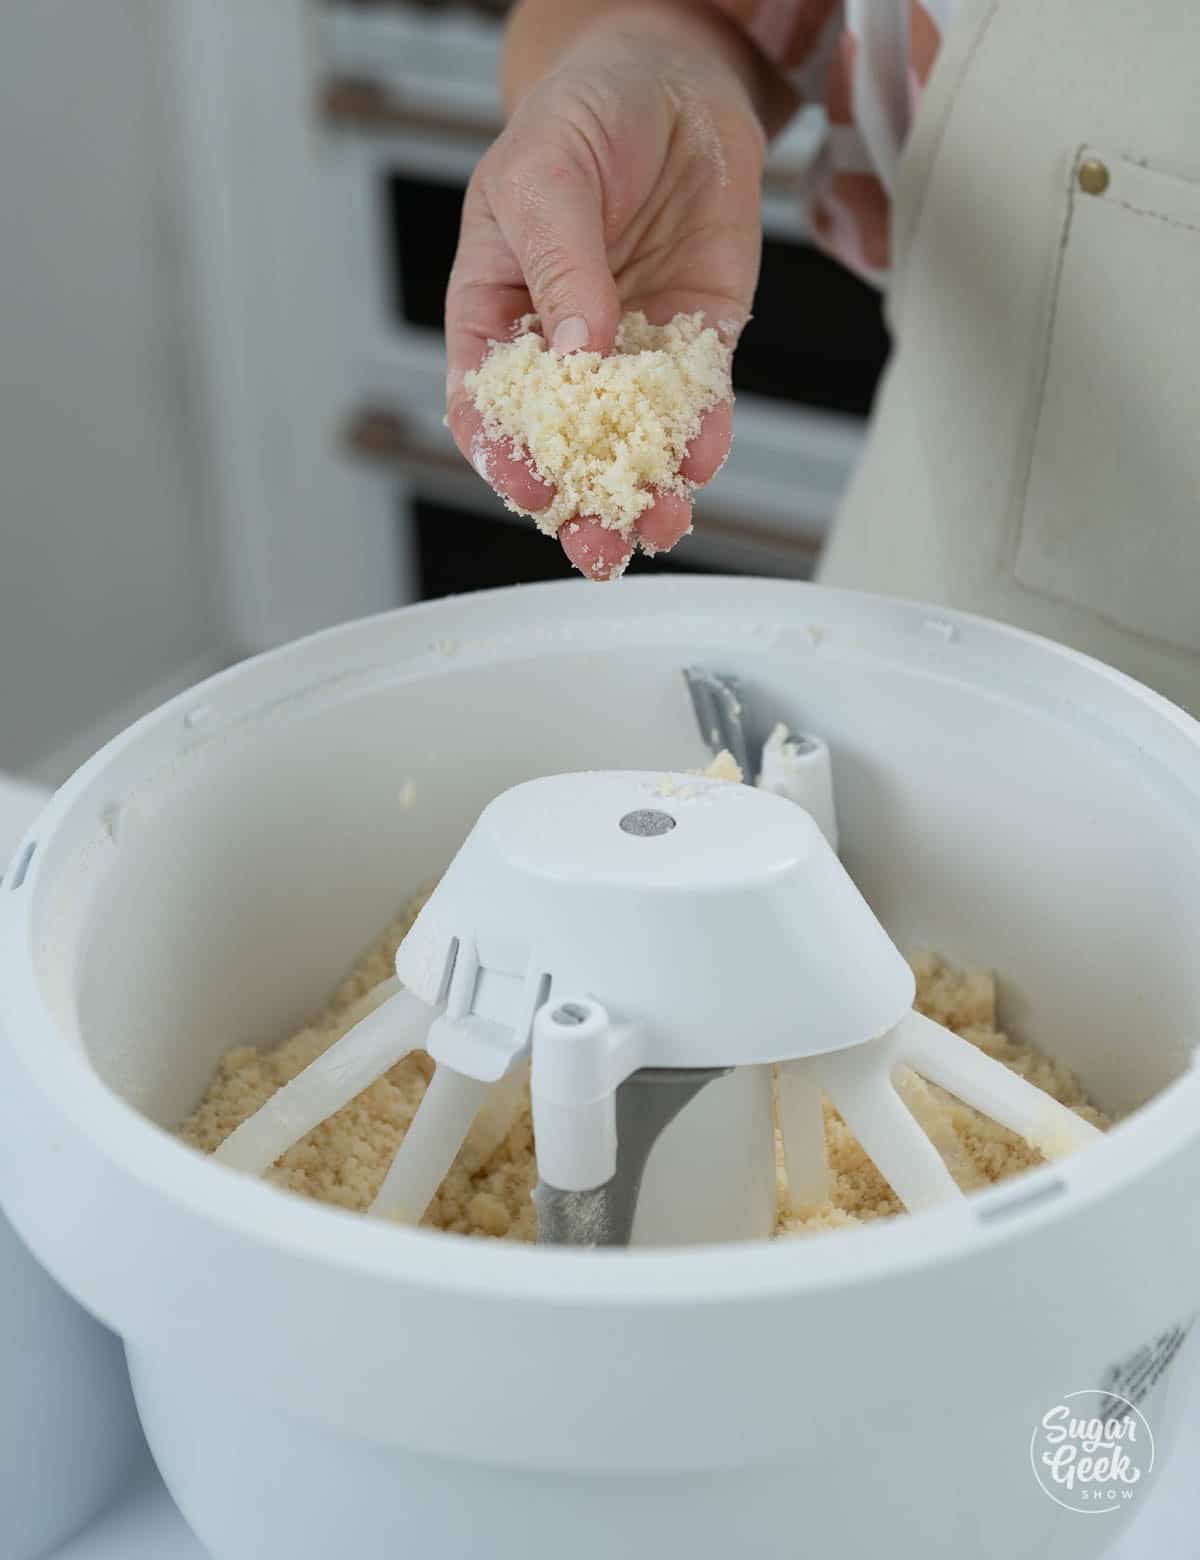 showing the coarse sand texture of cake batter